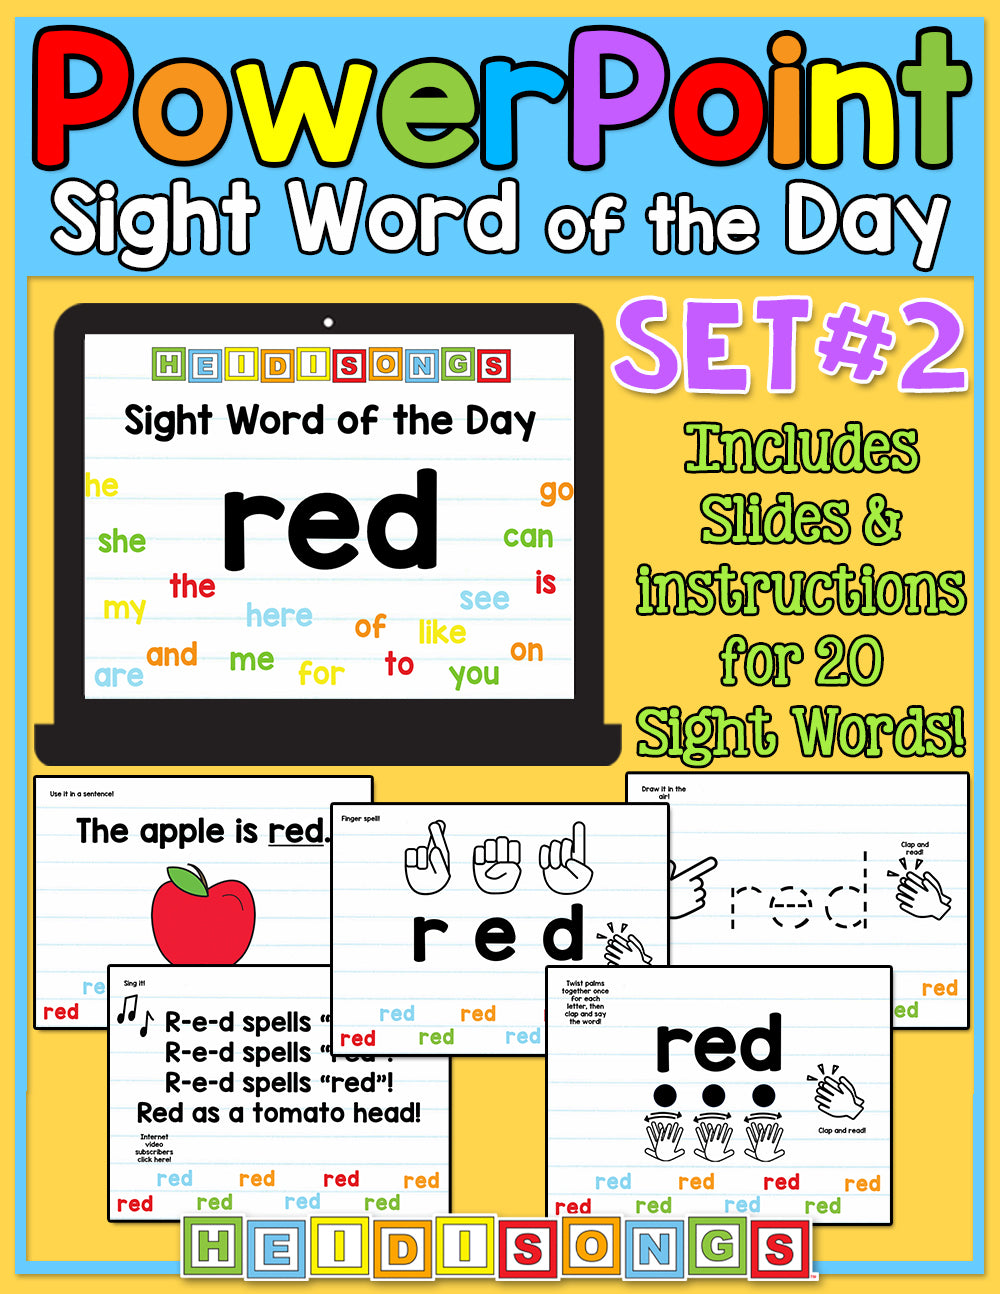 Sight Word of the Day For PowerPoint - Set 2